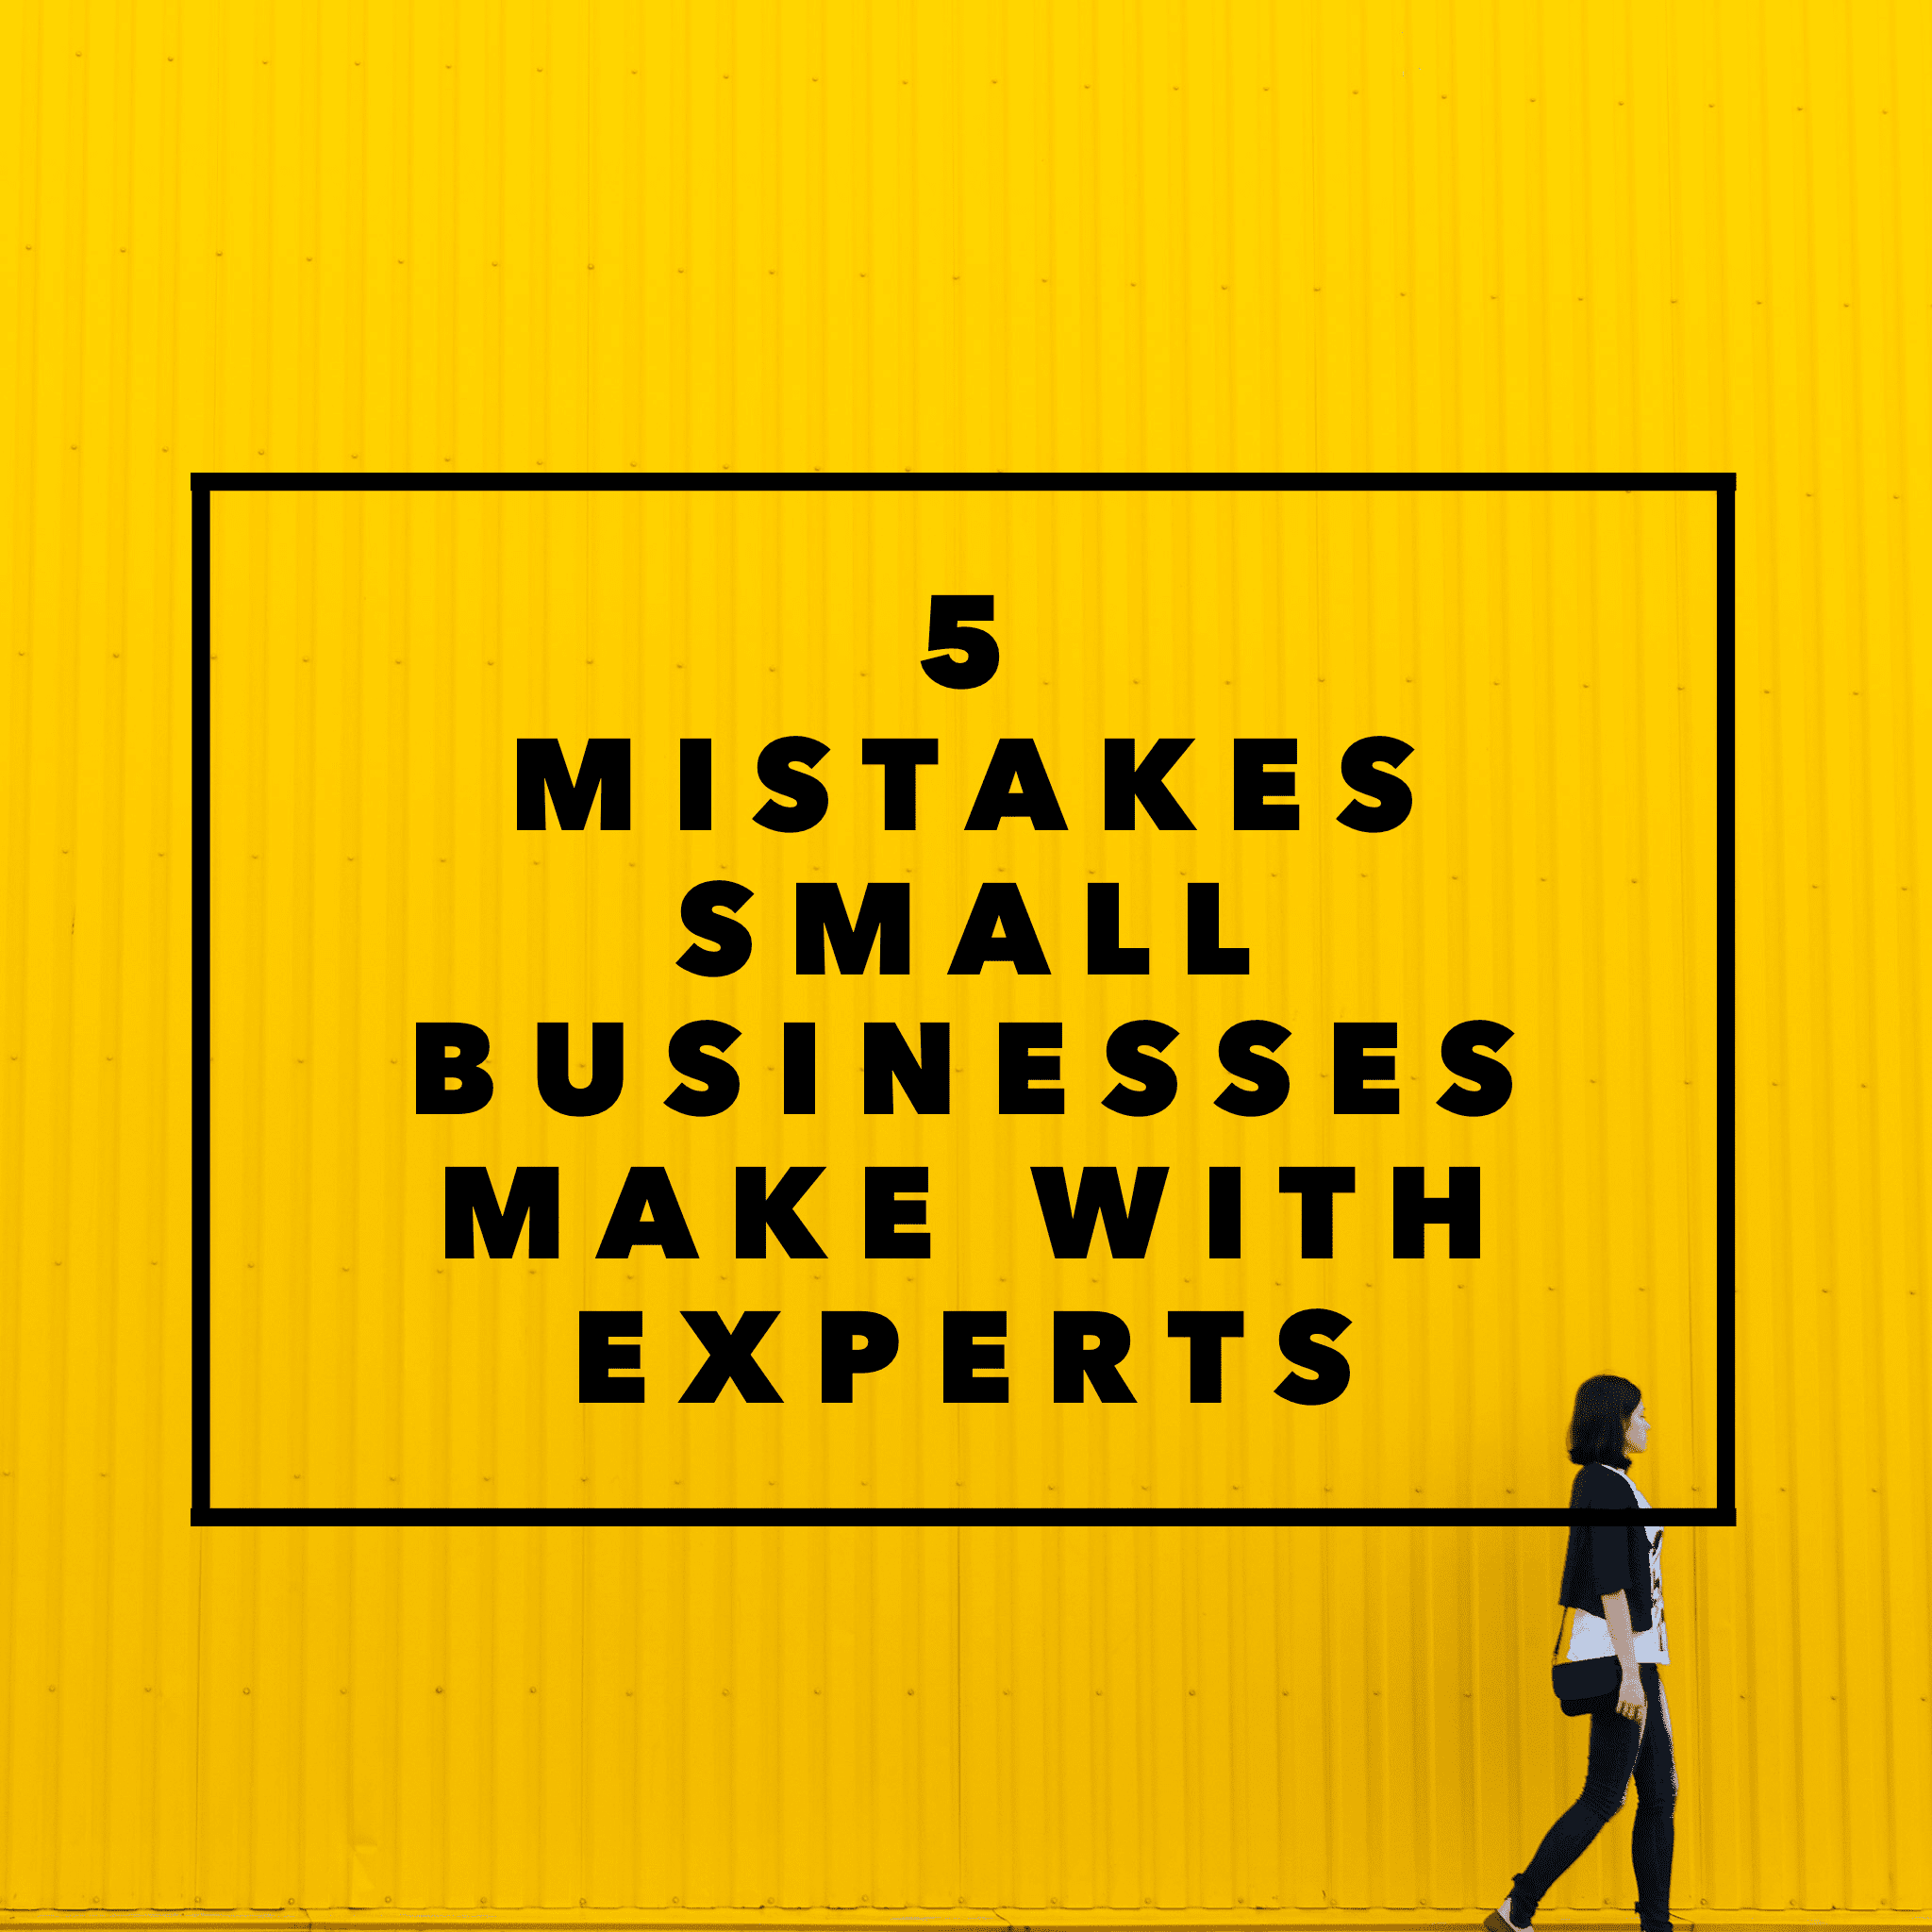 5 Mistakes Small Businesses Make With Experts